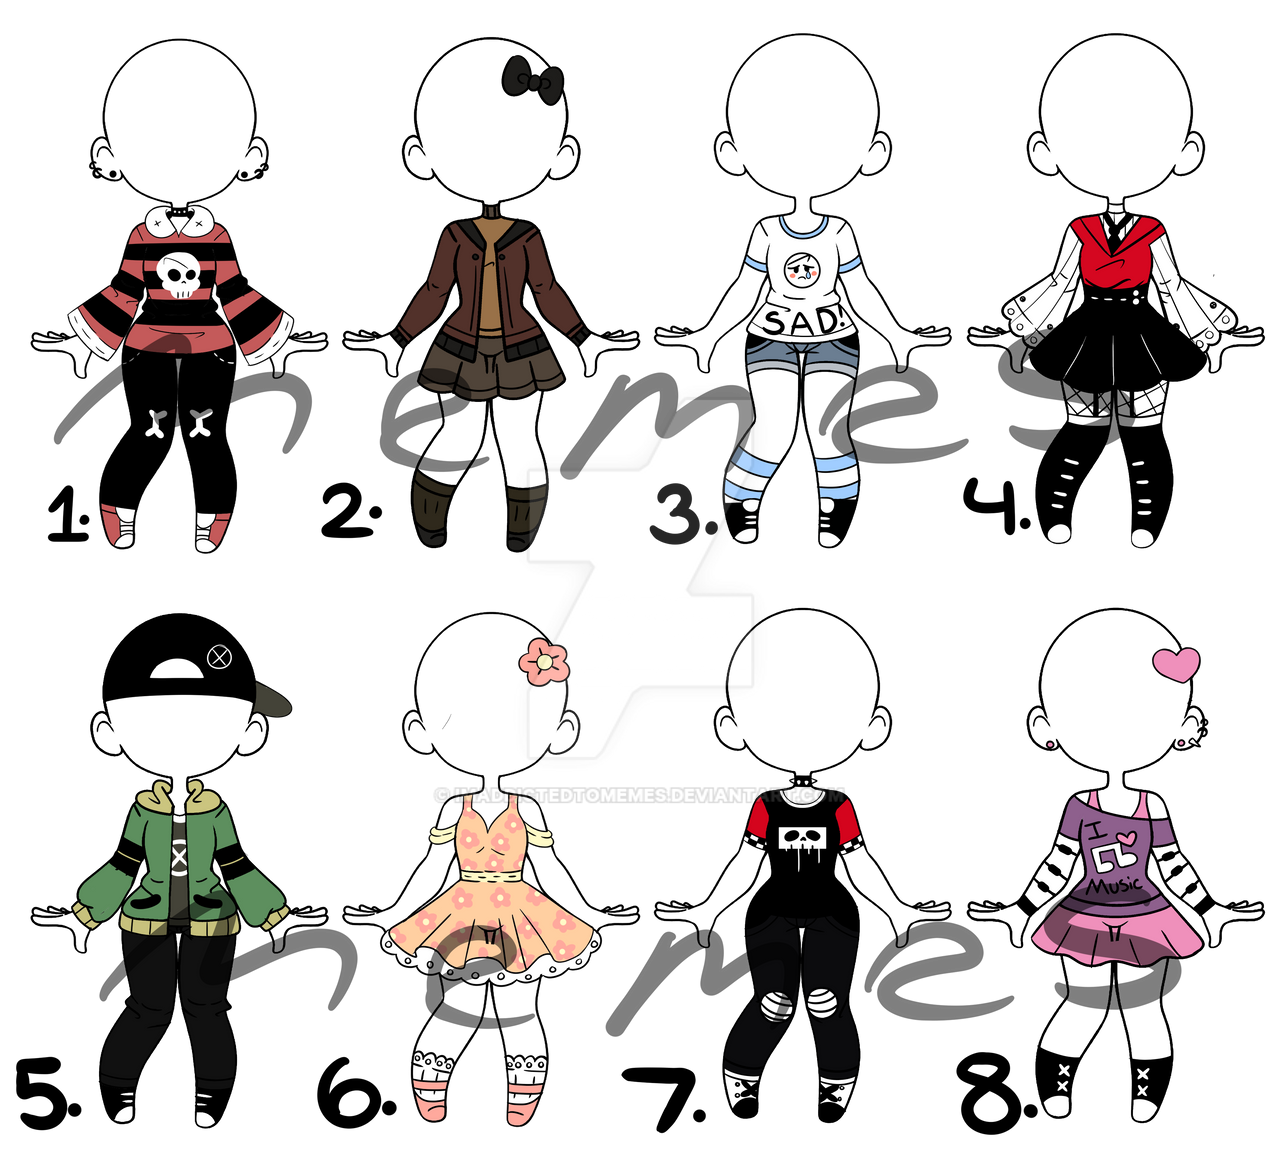 {CLOSED} Clothes # 7 by Imaddictedtomemes on DeviantArt